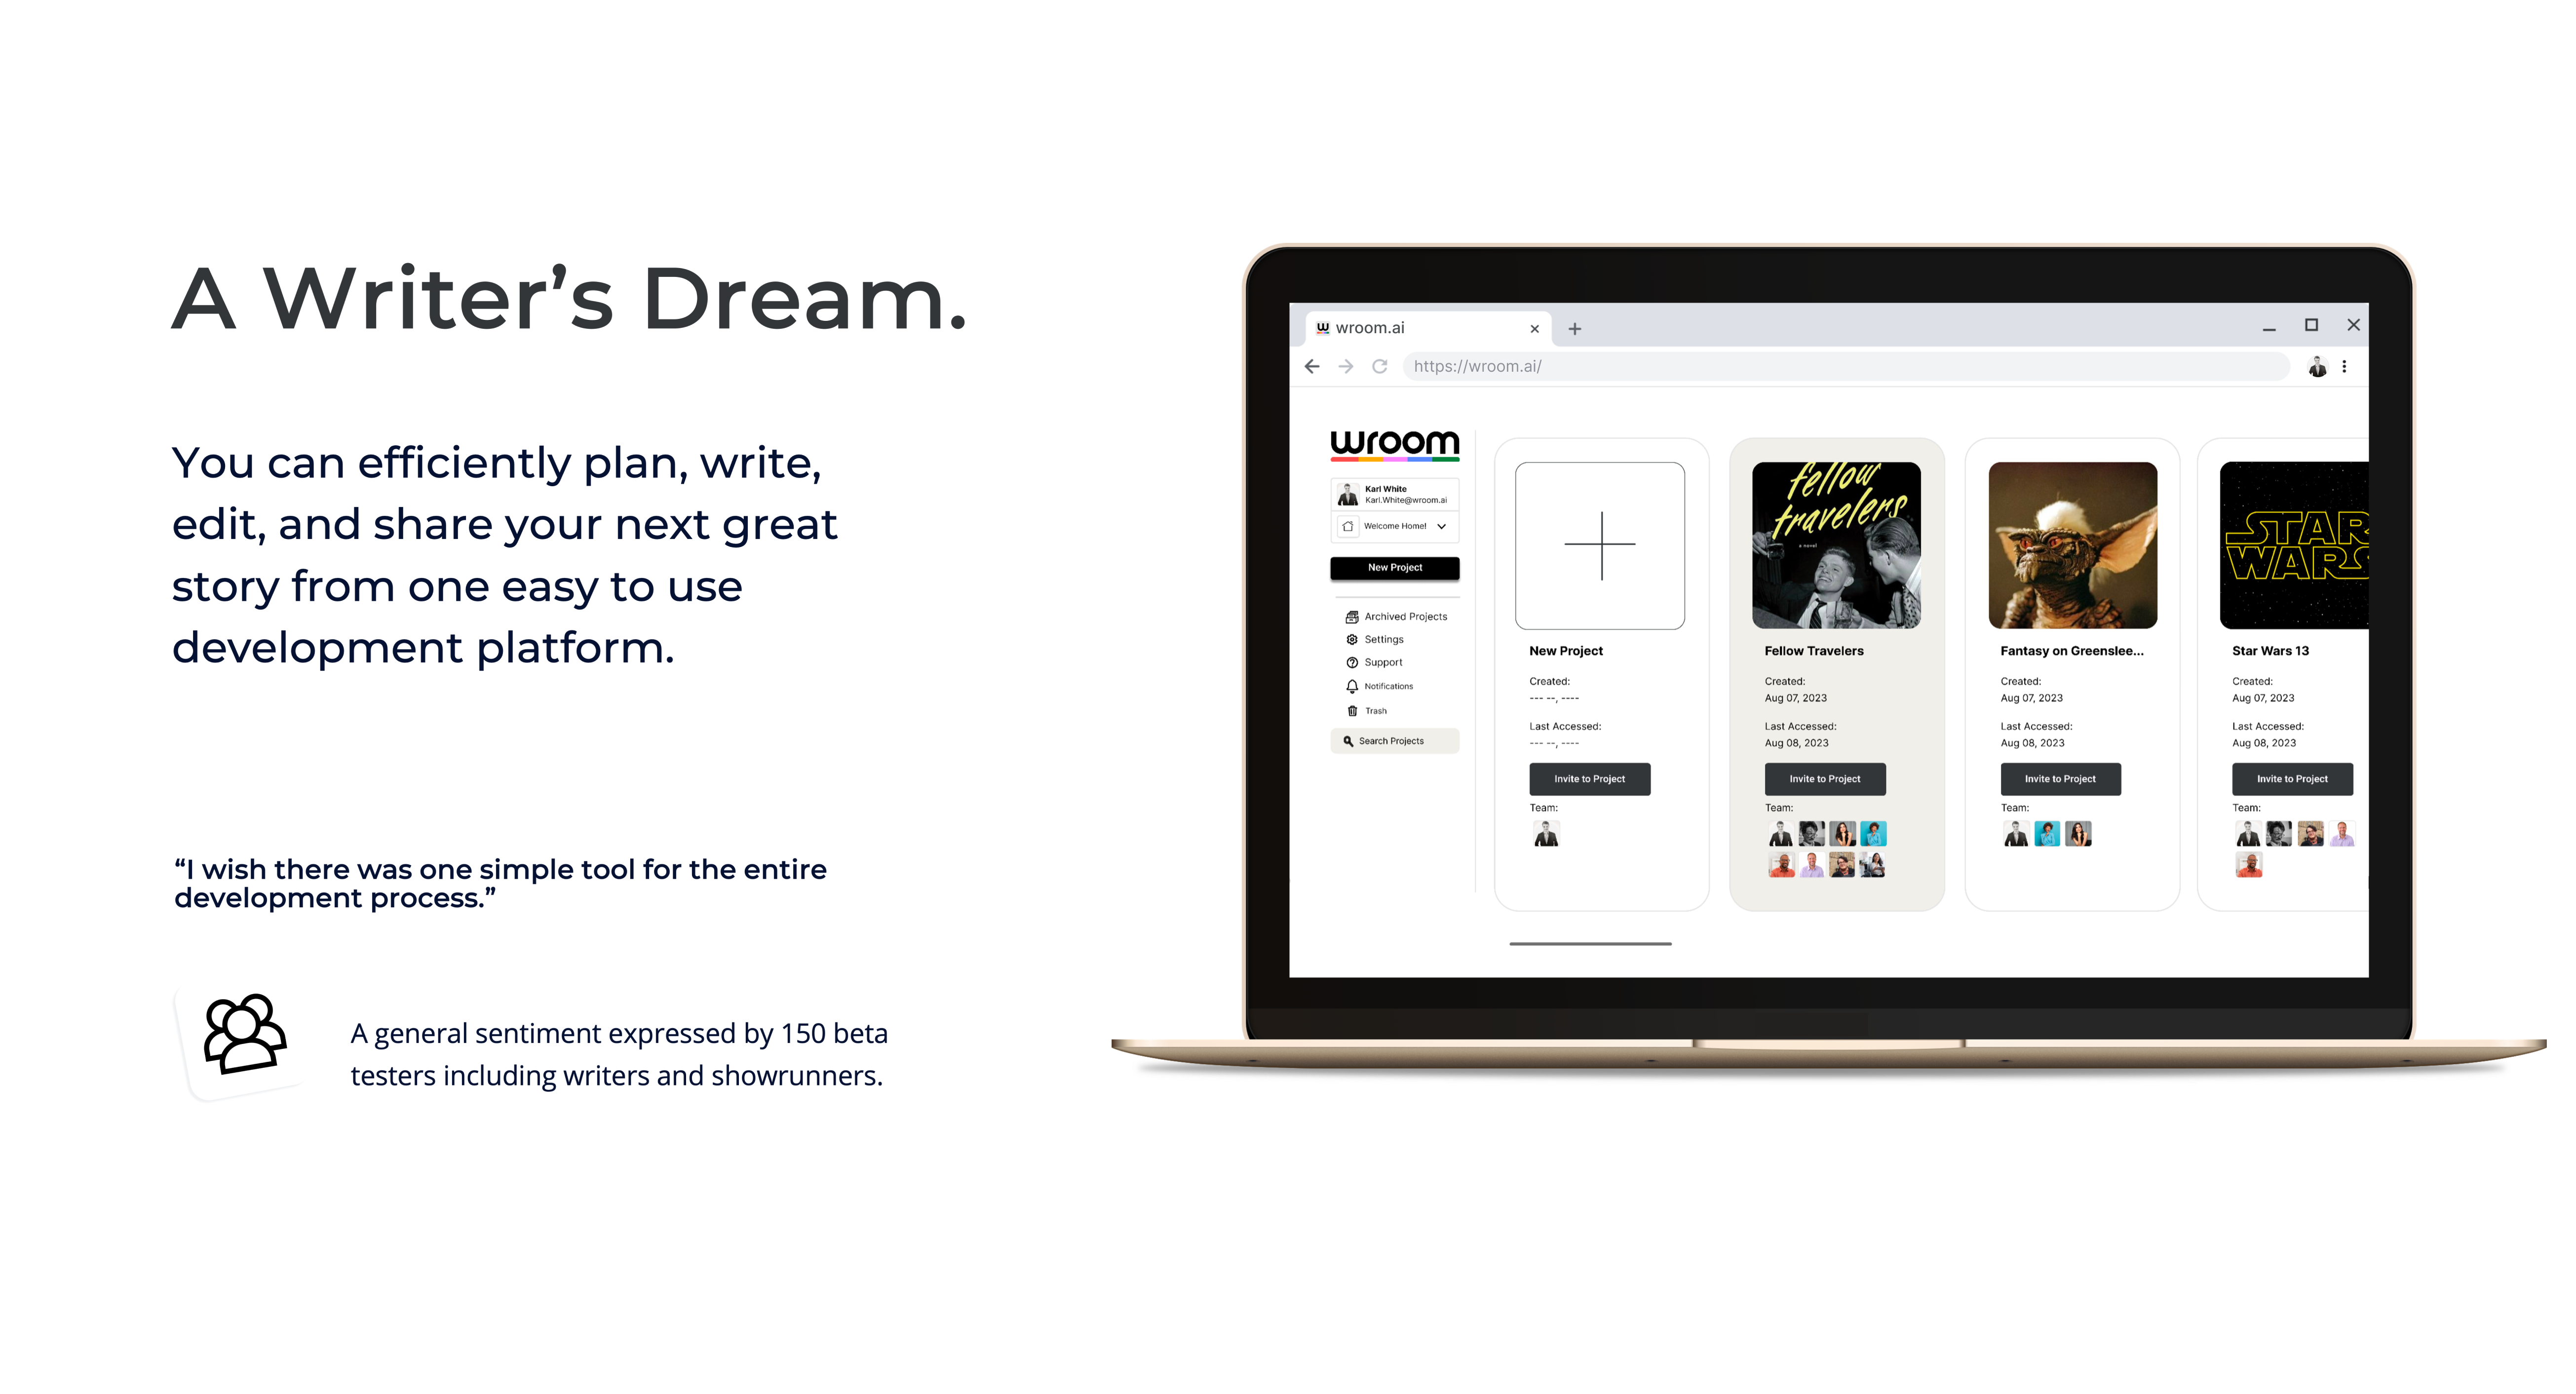 A writer's dream. 

You can efficiently plan, write, edit, and share your next great story from one easy to use development platform. 

quote "I wish there was one simple tool fro the entire development process."

a general sentiment expressed by 150 beta testers including writers and showrunners.  